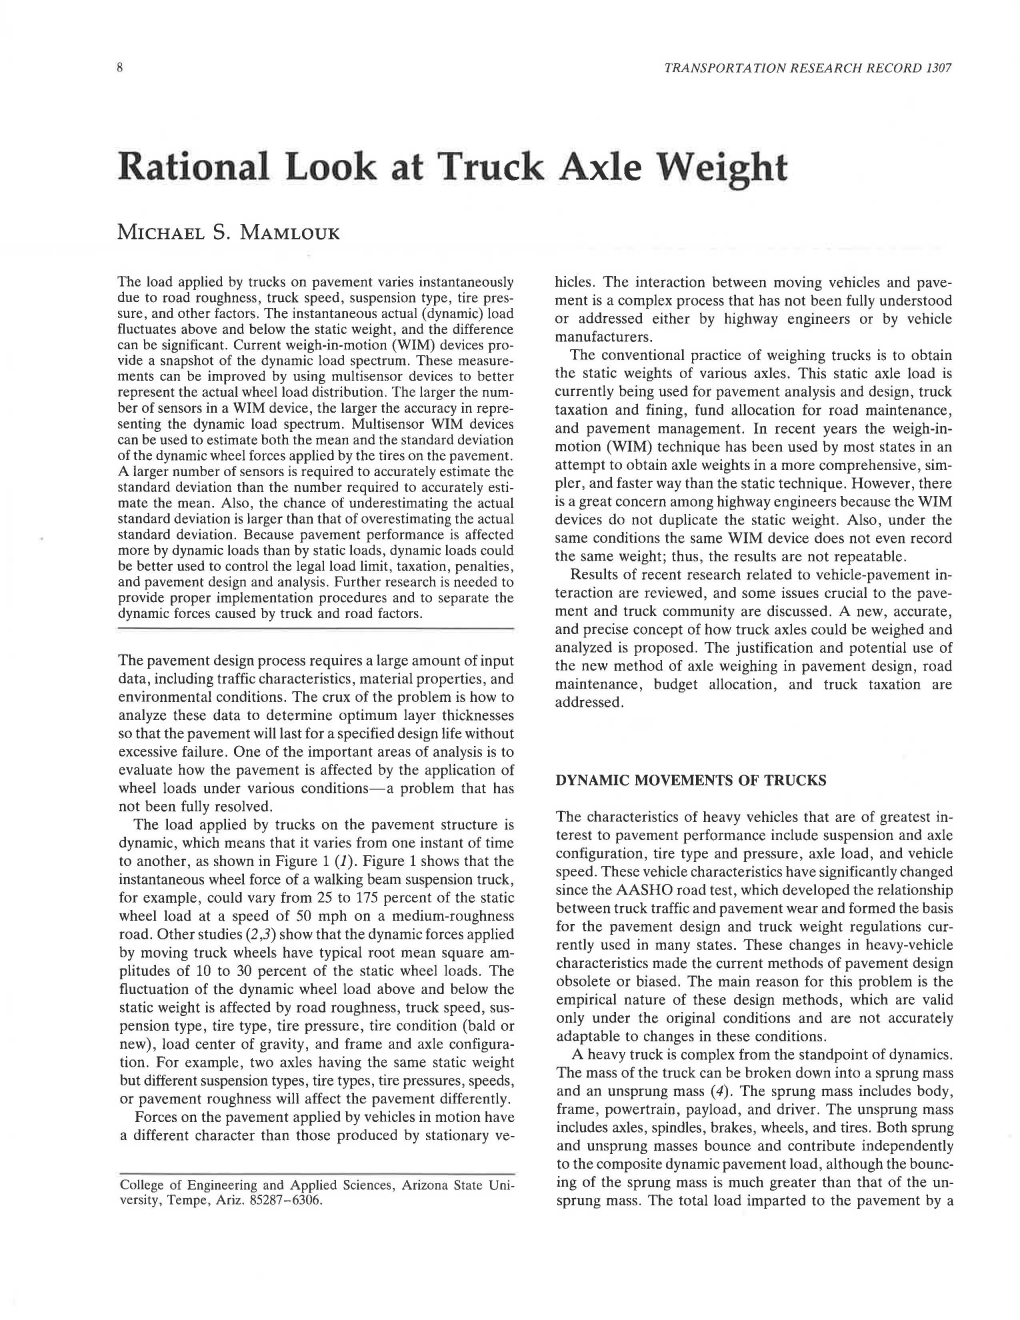 Rational Look at Truck Axle Weight